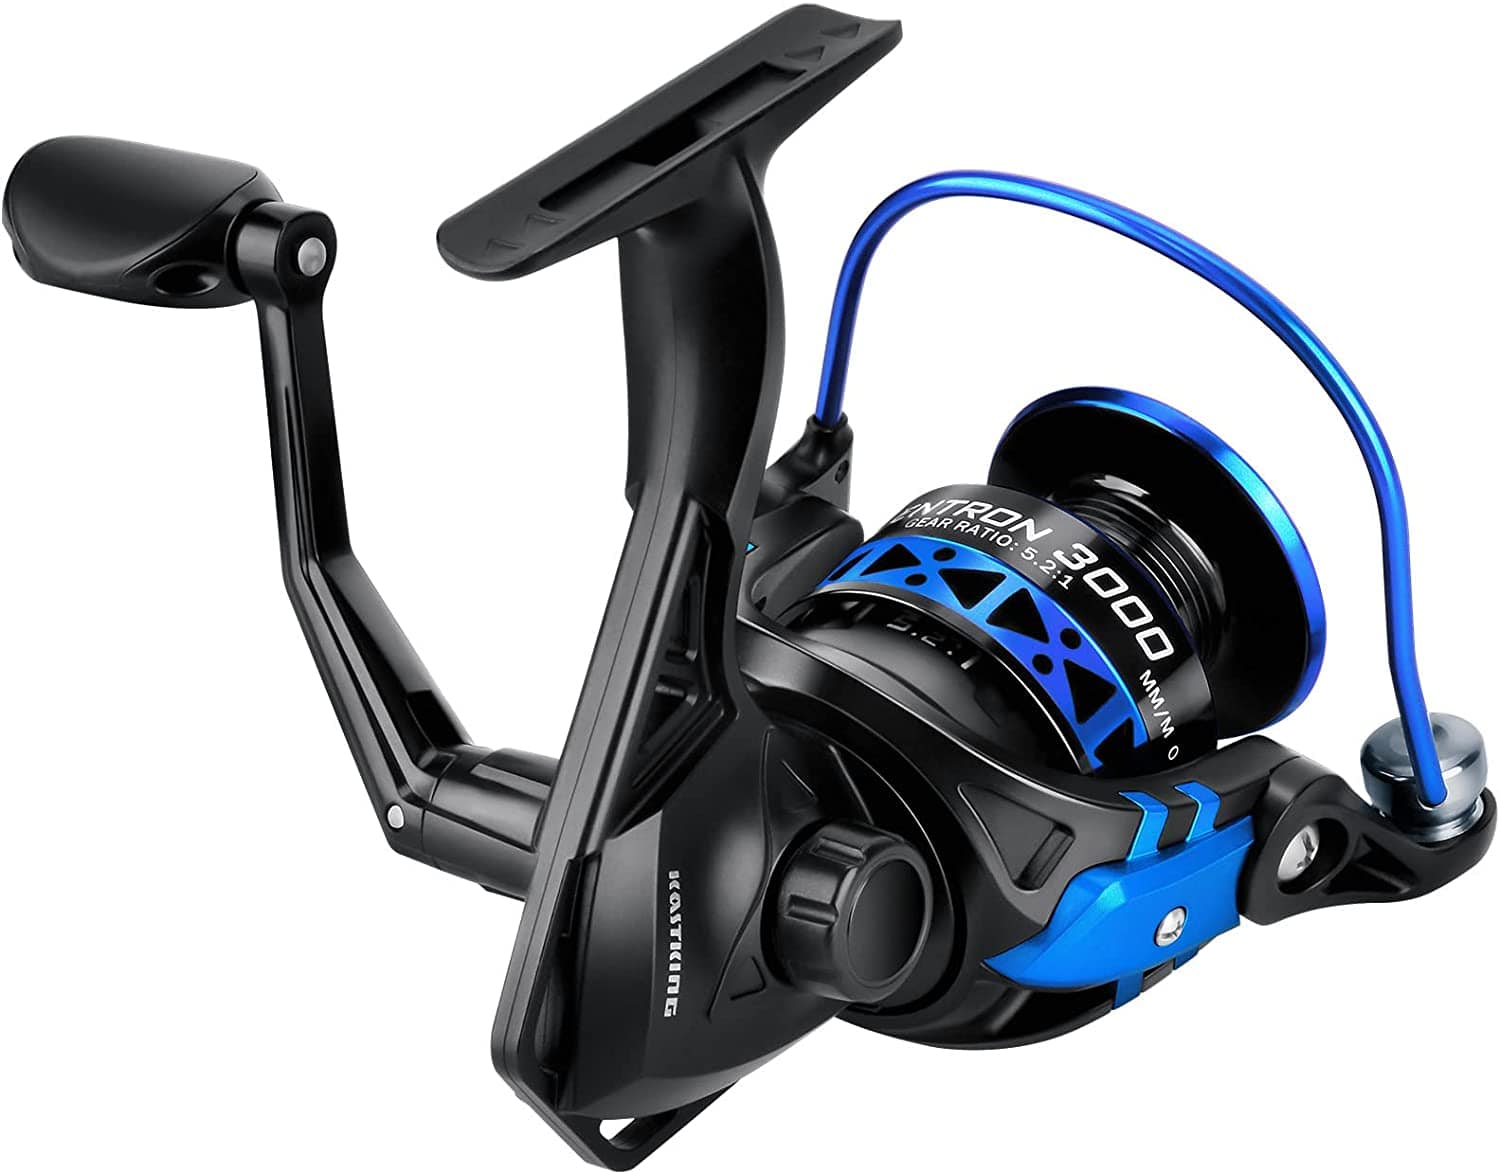 Kastking Summer and Centron Spinning Reels, 9 +1 BB Light Weight, Ultra Smooth Powerful, Size 500 Is Perfect for Ultralight/Ice Fishing.